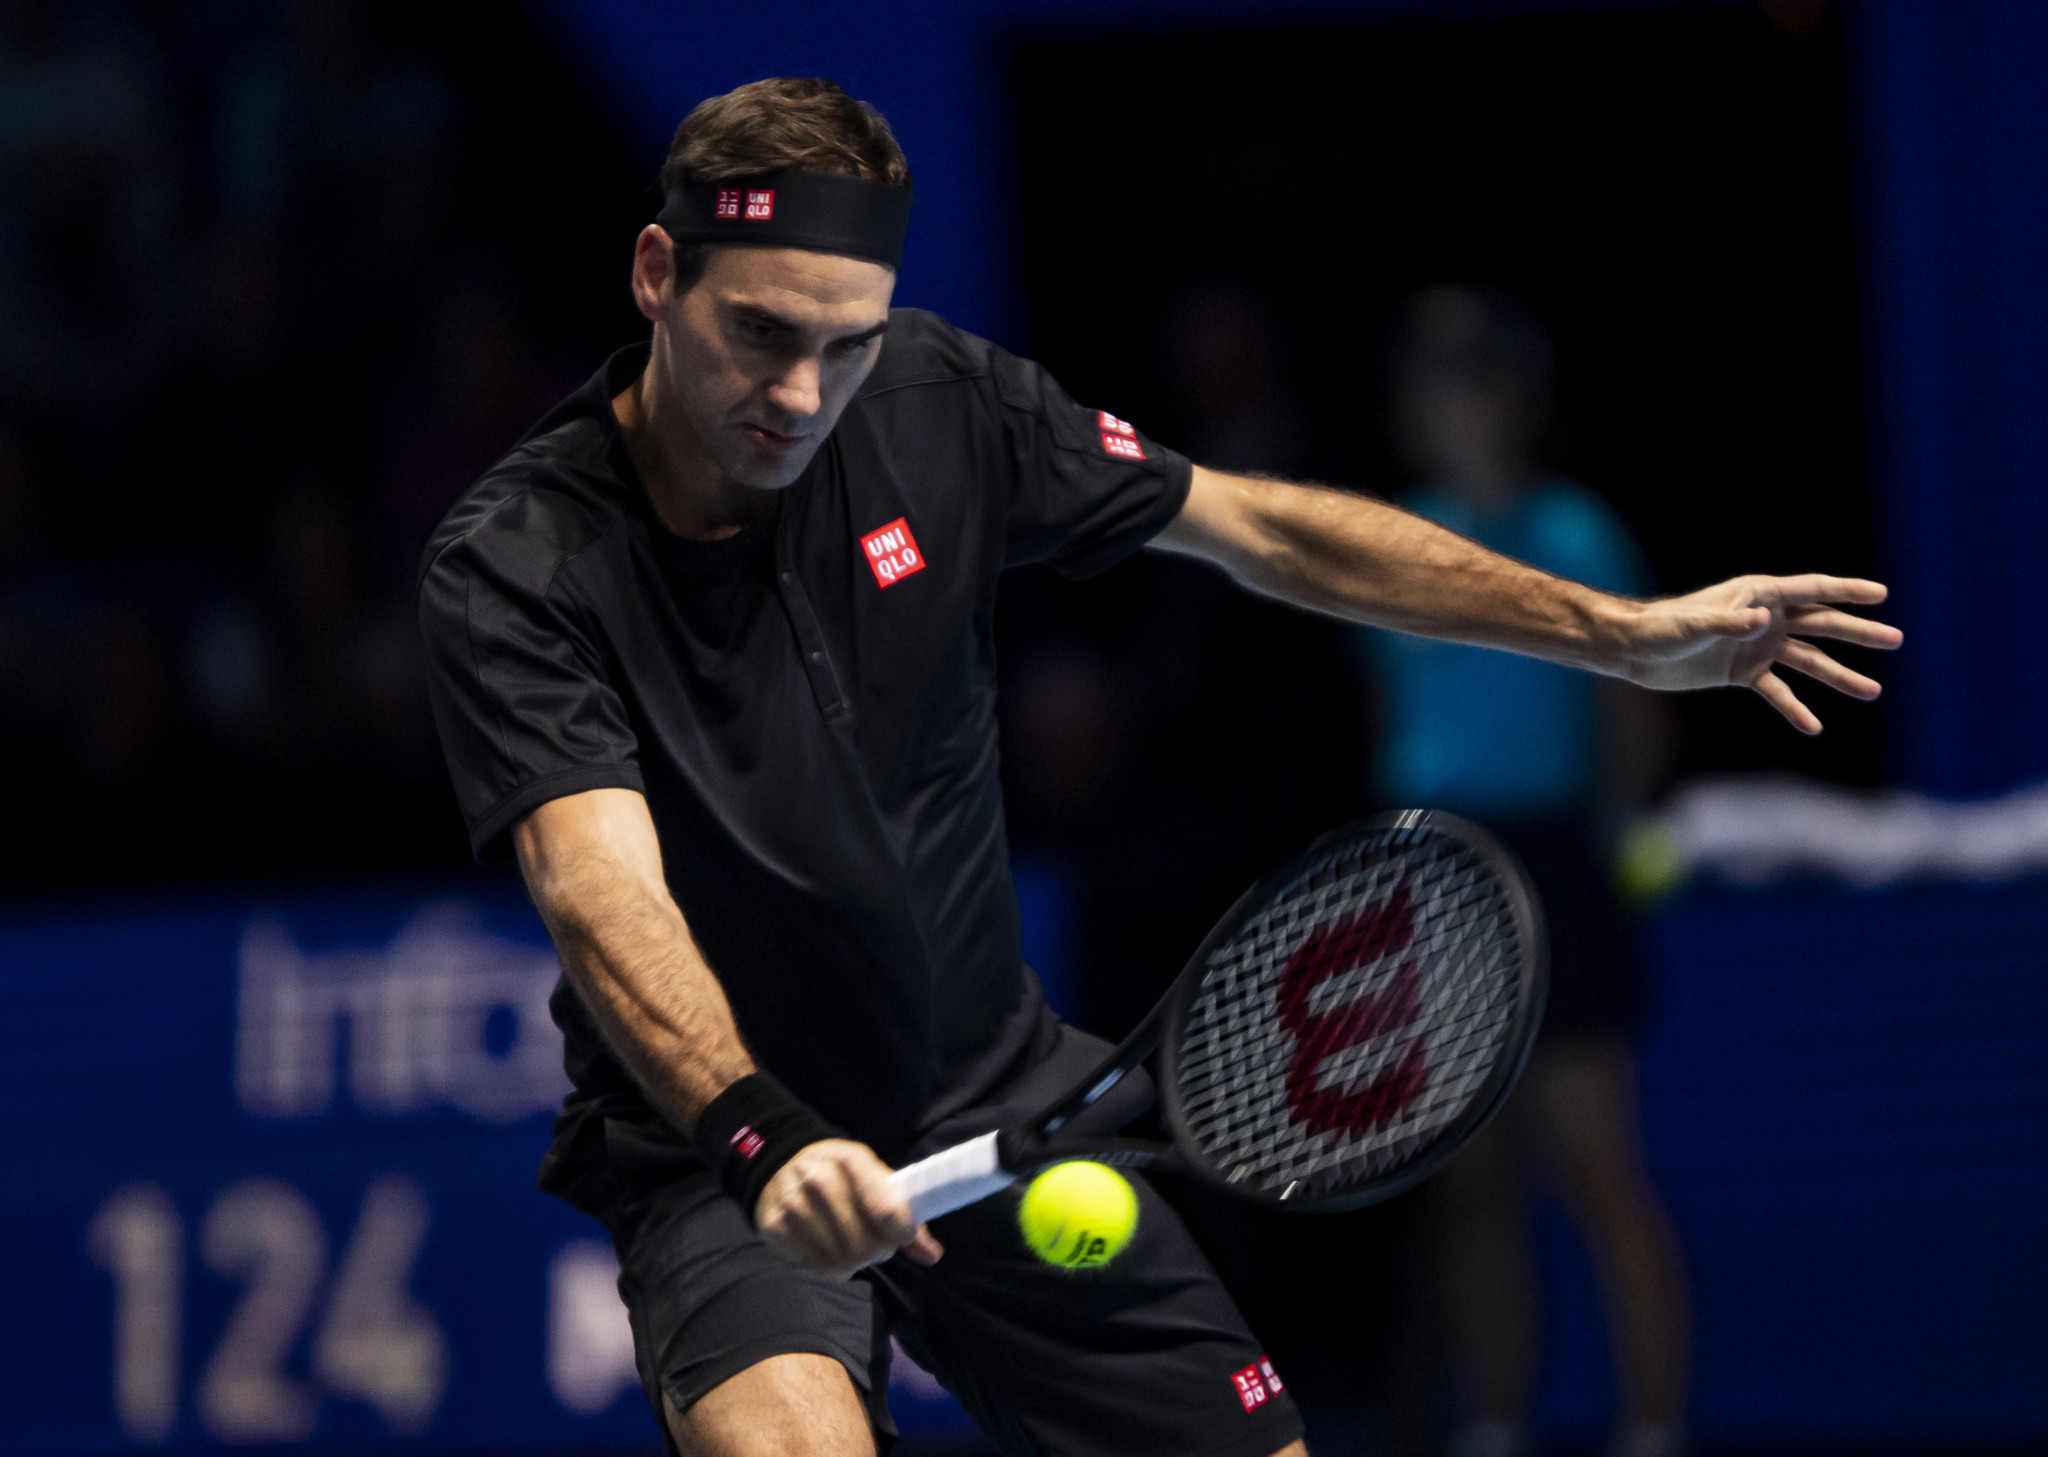 Federer bounces back with win as Thiem stuns Djokovic at ATP Finals